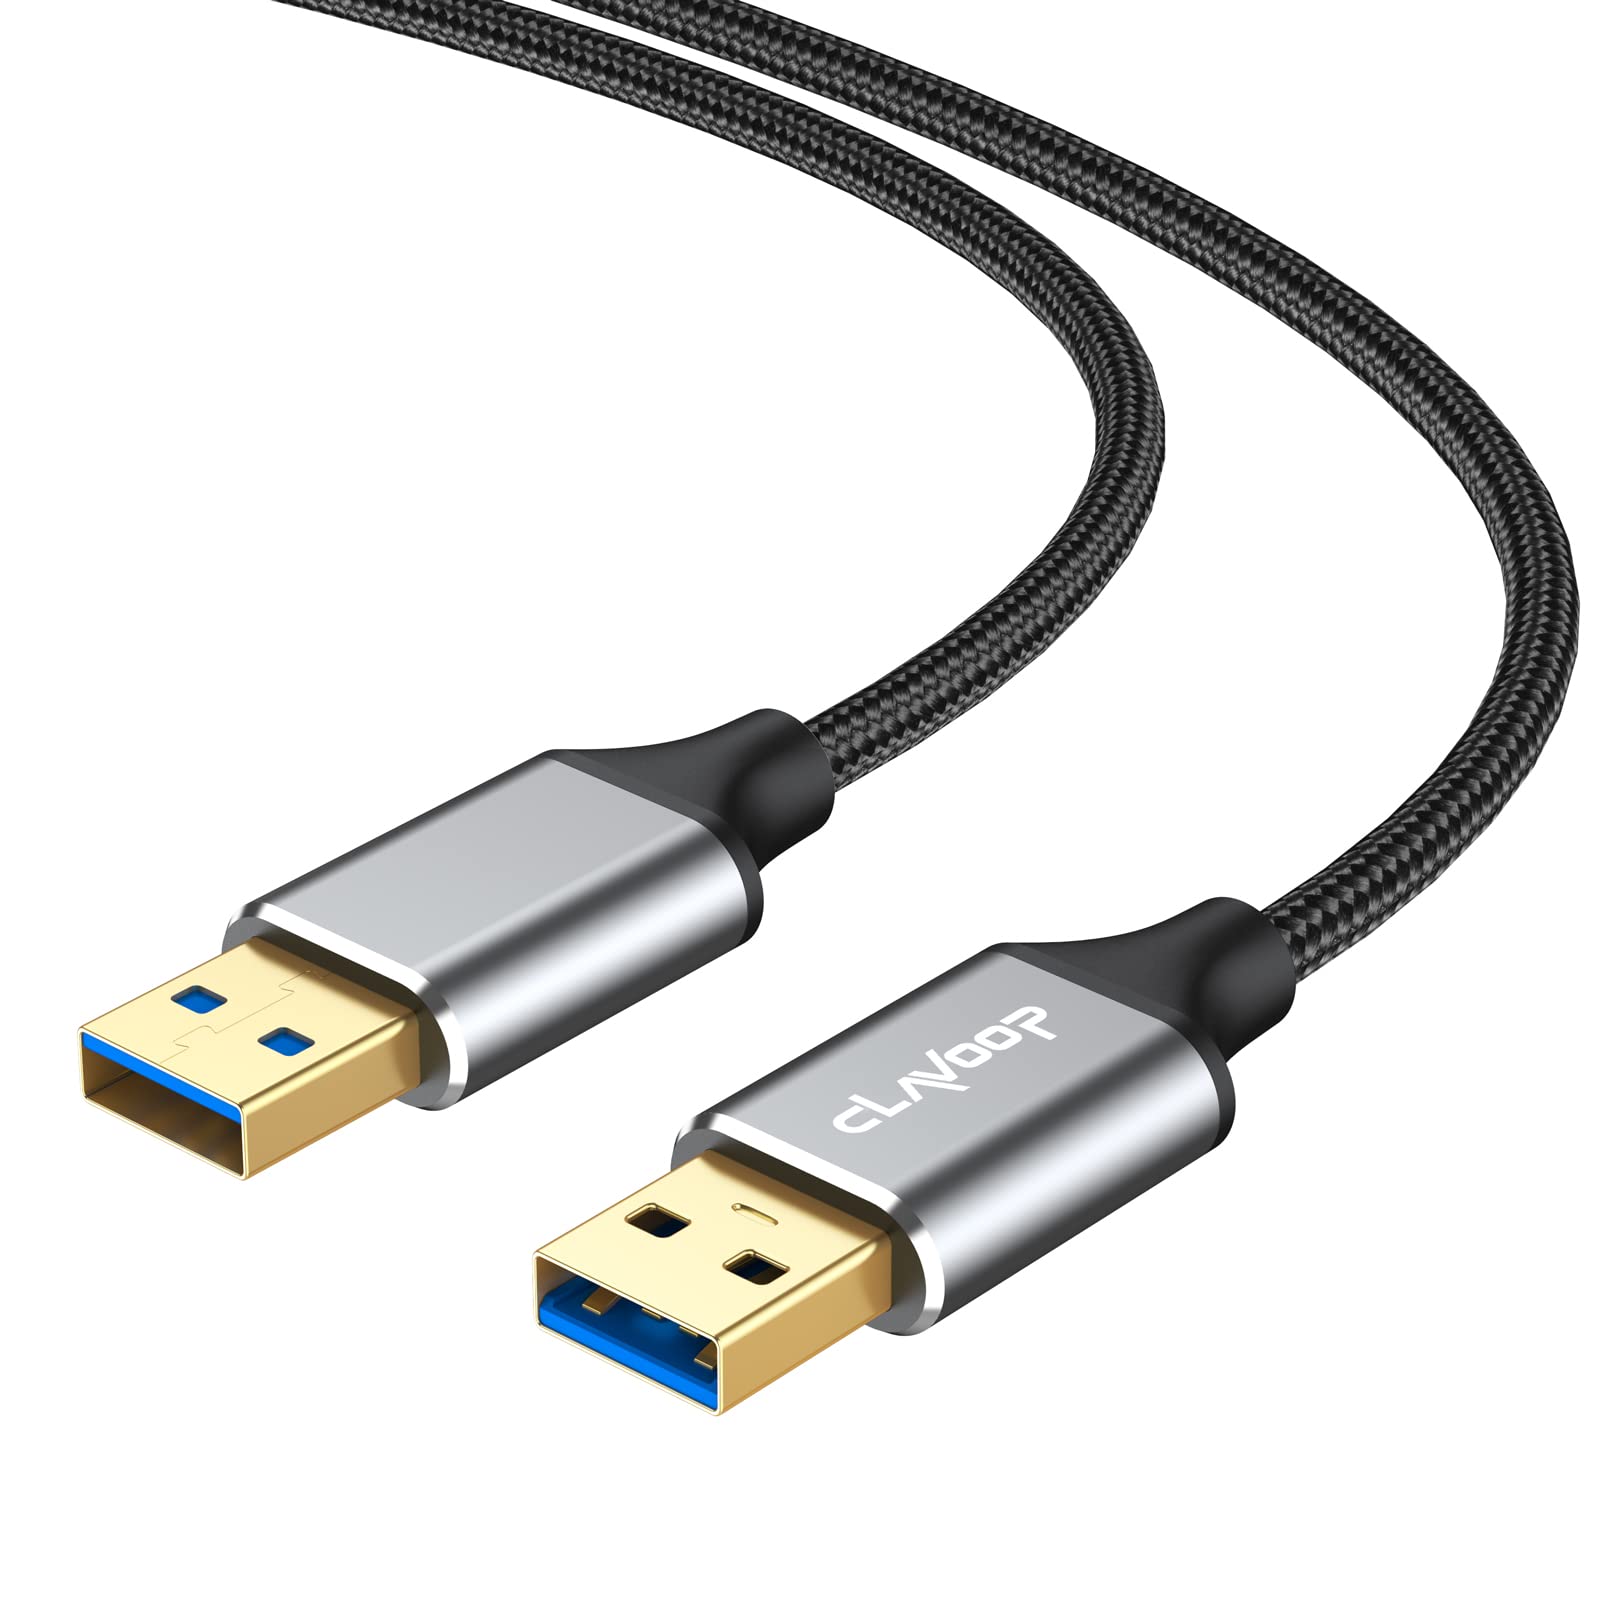 CLAVOOP USB to USB Cable 6ft, Double Sided USB 3.0 Type A Cable Male to Male USB A to USB A Braided Cord for Data Transfer Compatible with Monitor PC Laptop Hard Drive Enclosures